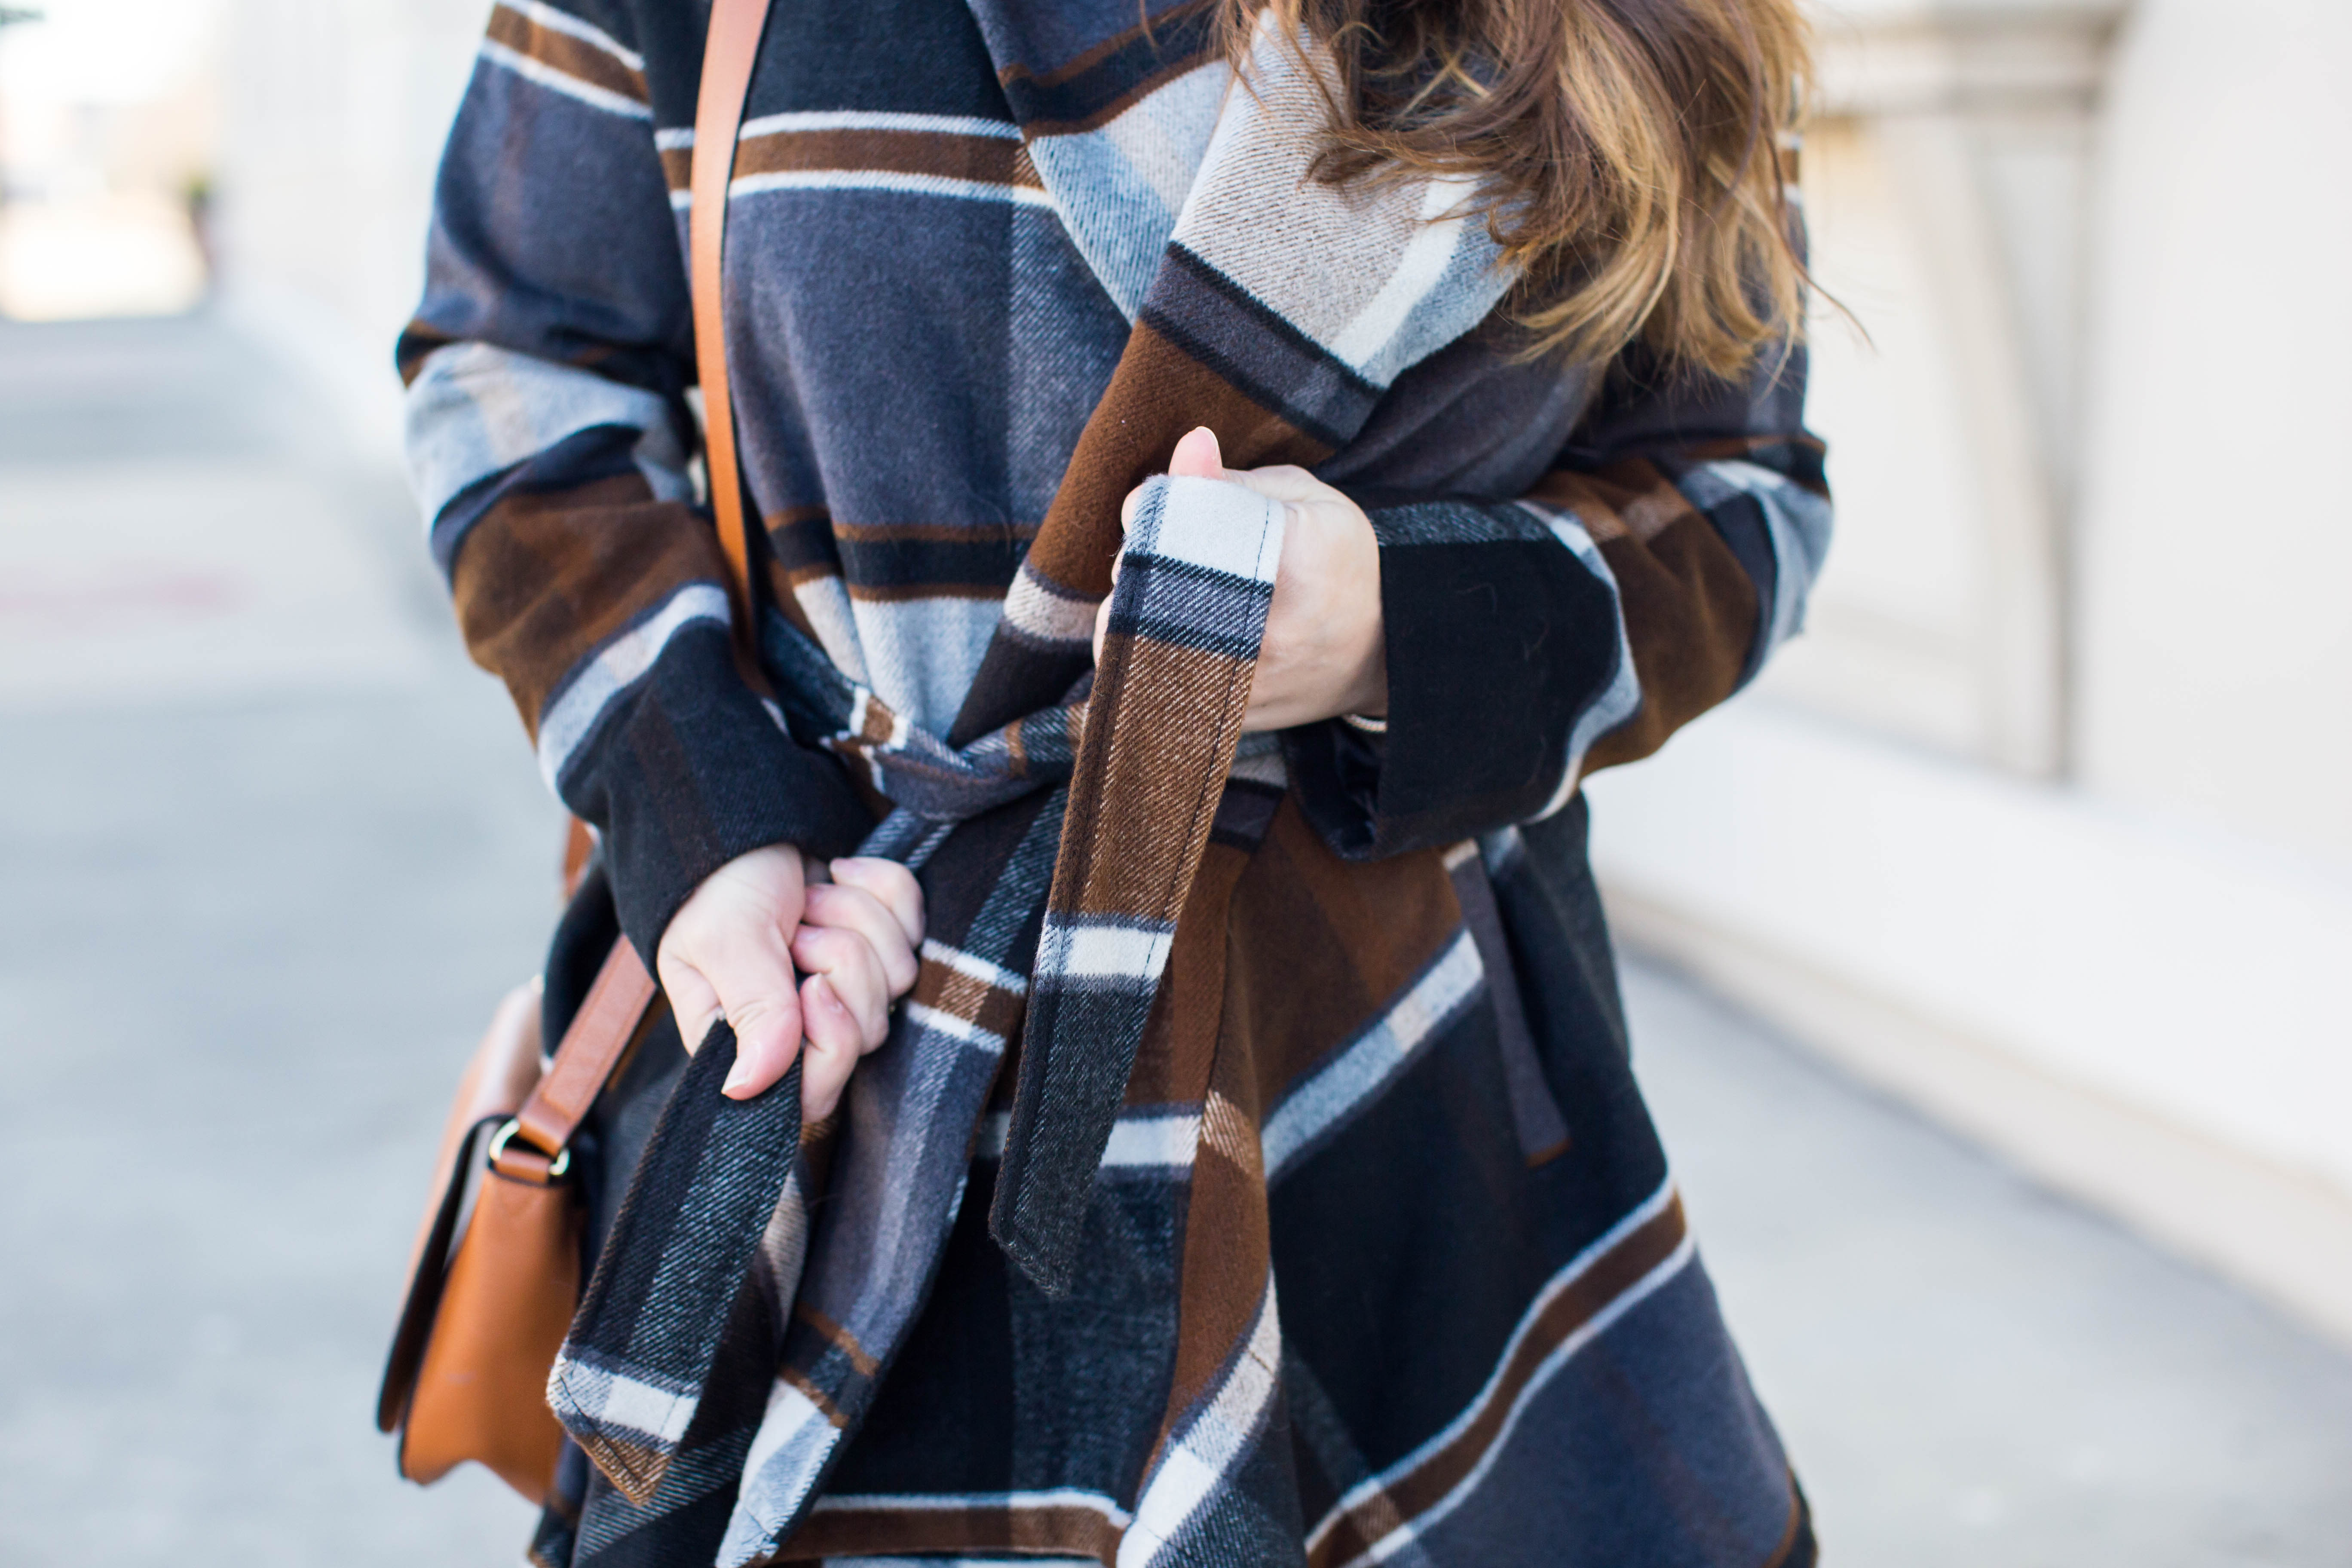 Versatile Plaid Coat by popular North Carolina fashion blogger Coffee Beans and Bobby Pins